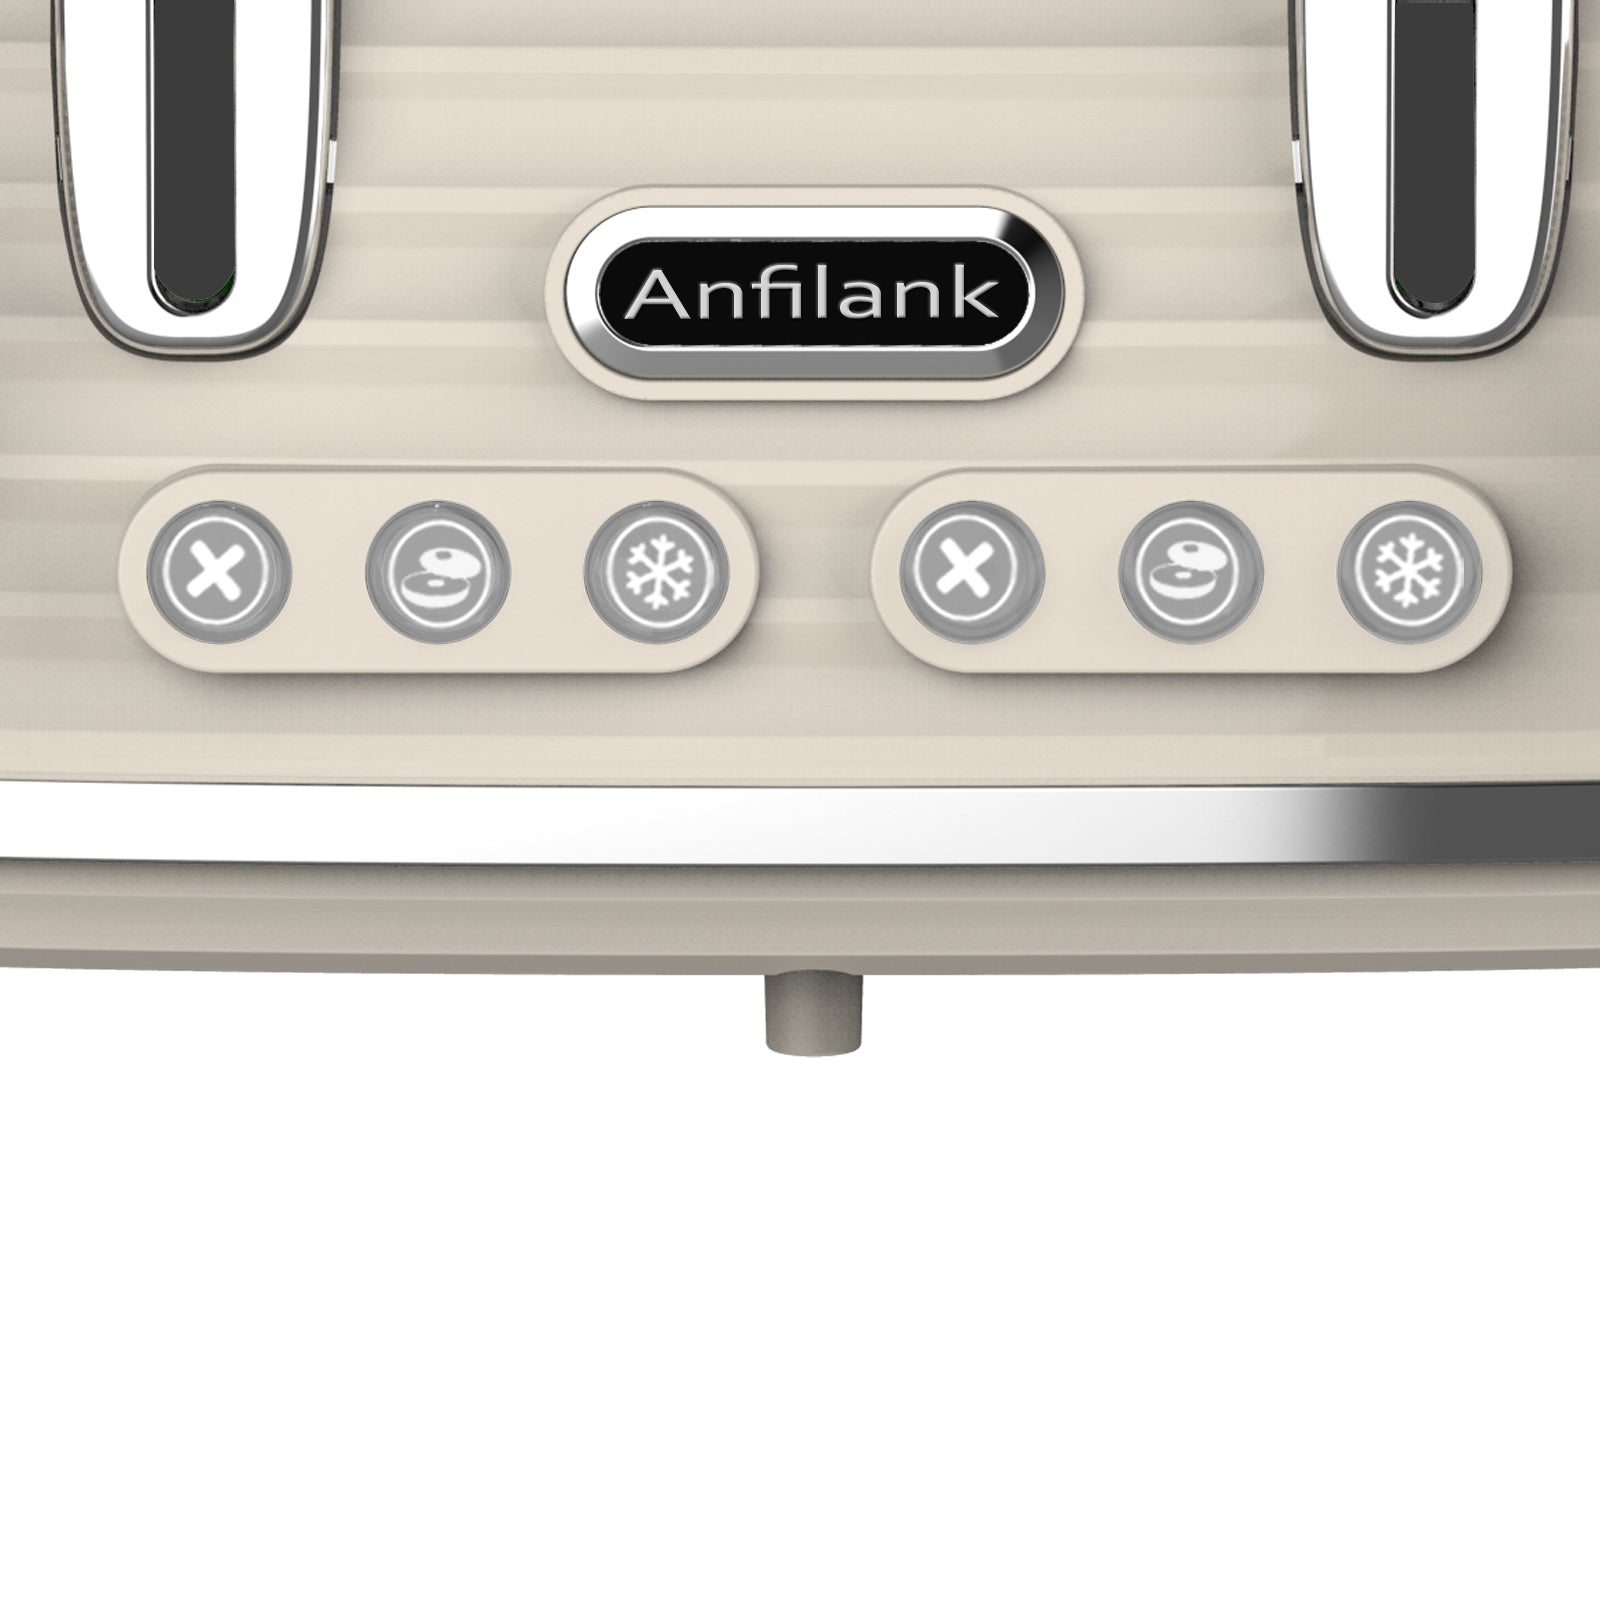 Anfilank 4-Slice Toaster, Retro Toaster with Long Extra-Wide Slots and Removable Tray, KY-825